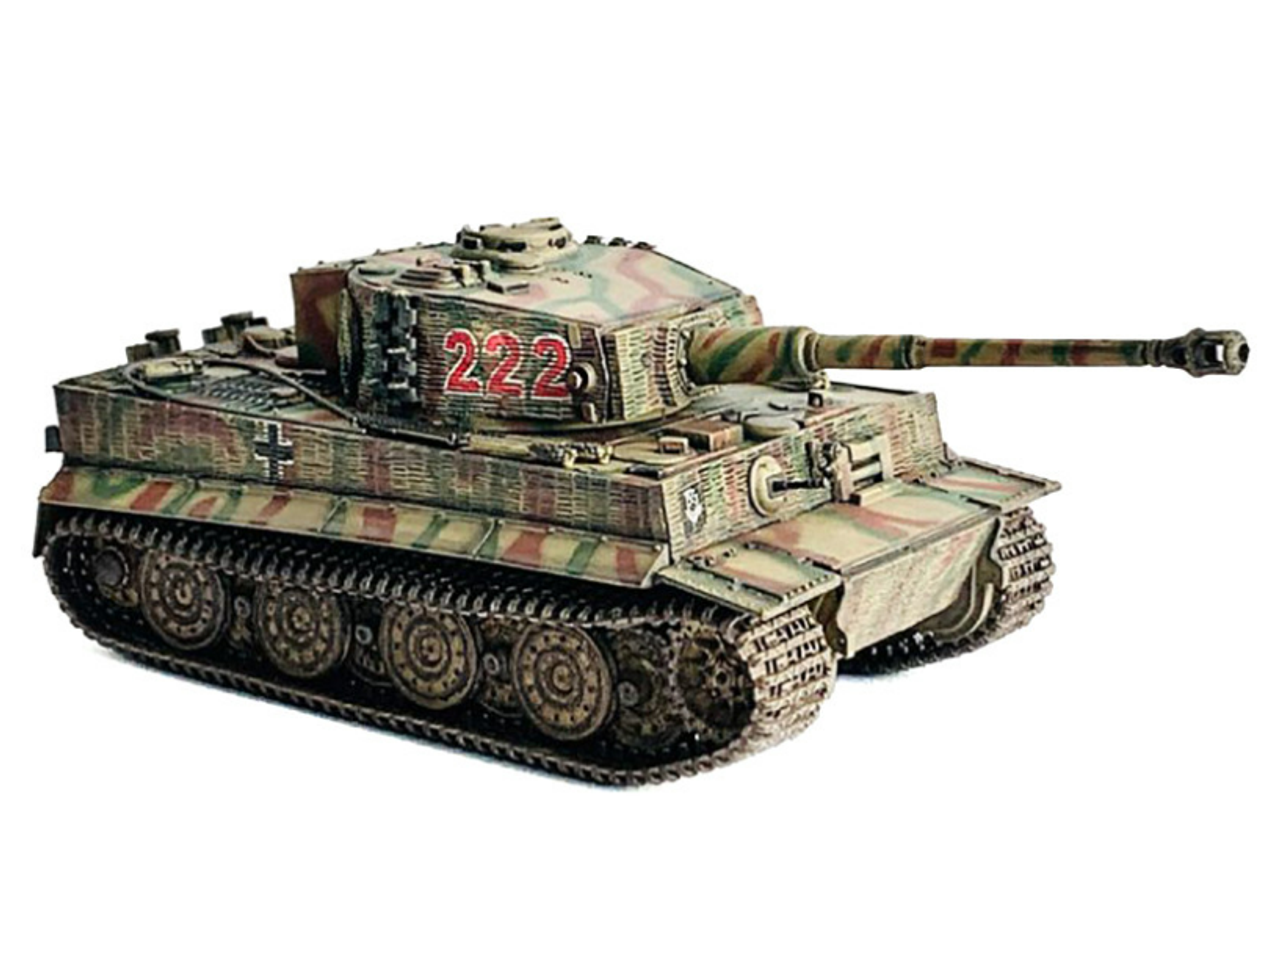 Germany Tiger I Late Production with Zimmerit Tank "Wittmann's Tiger #222 s.Pz.Abt.101 Normandy" (1944) "NEO Dragon Armor" Series 1/72 Plastic Model by Dragon Models